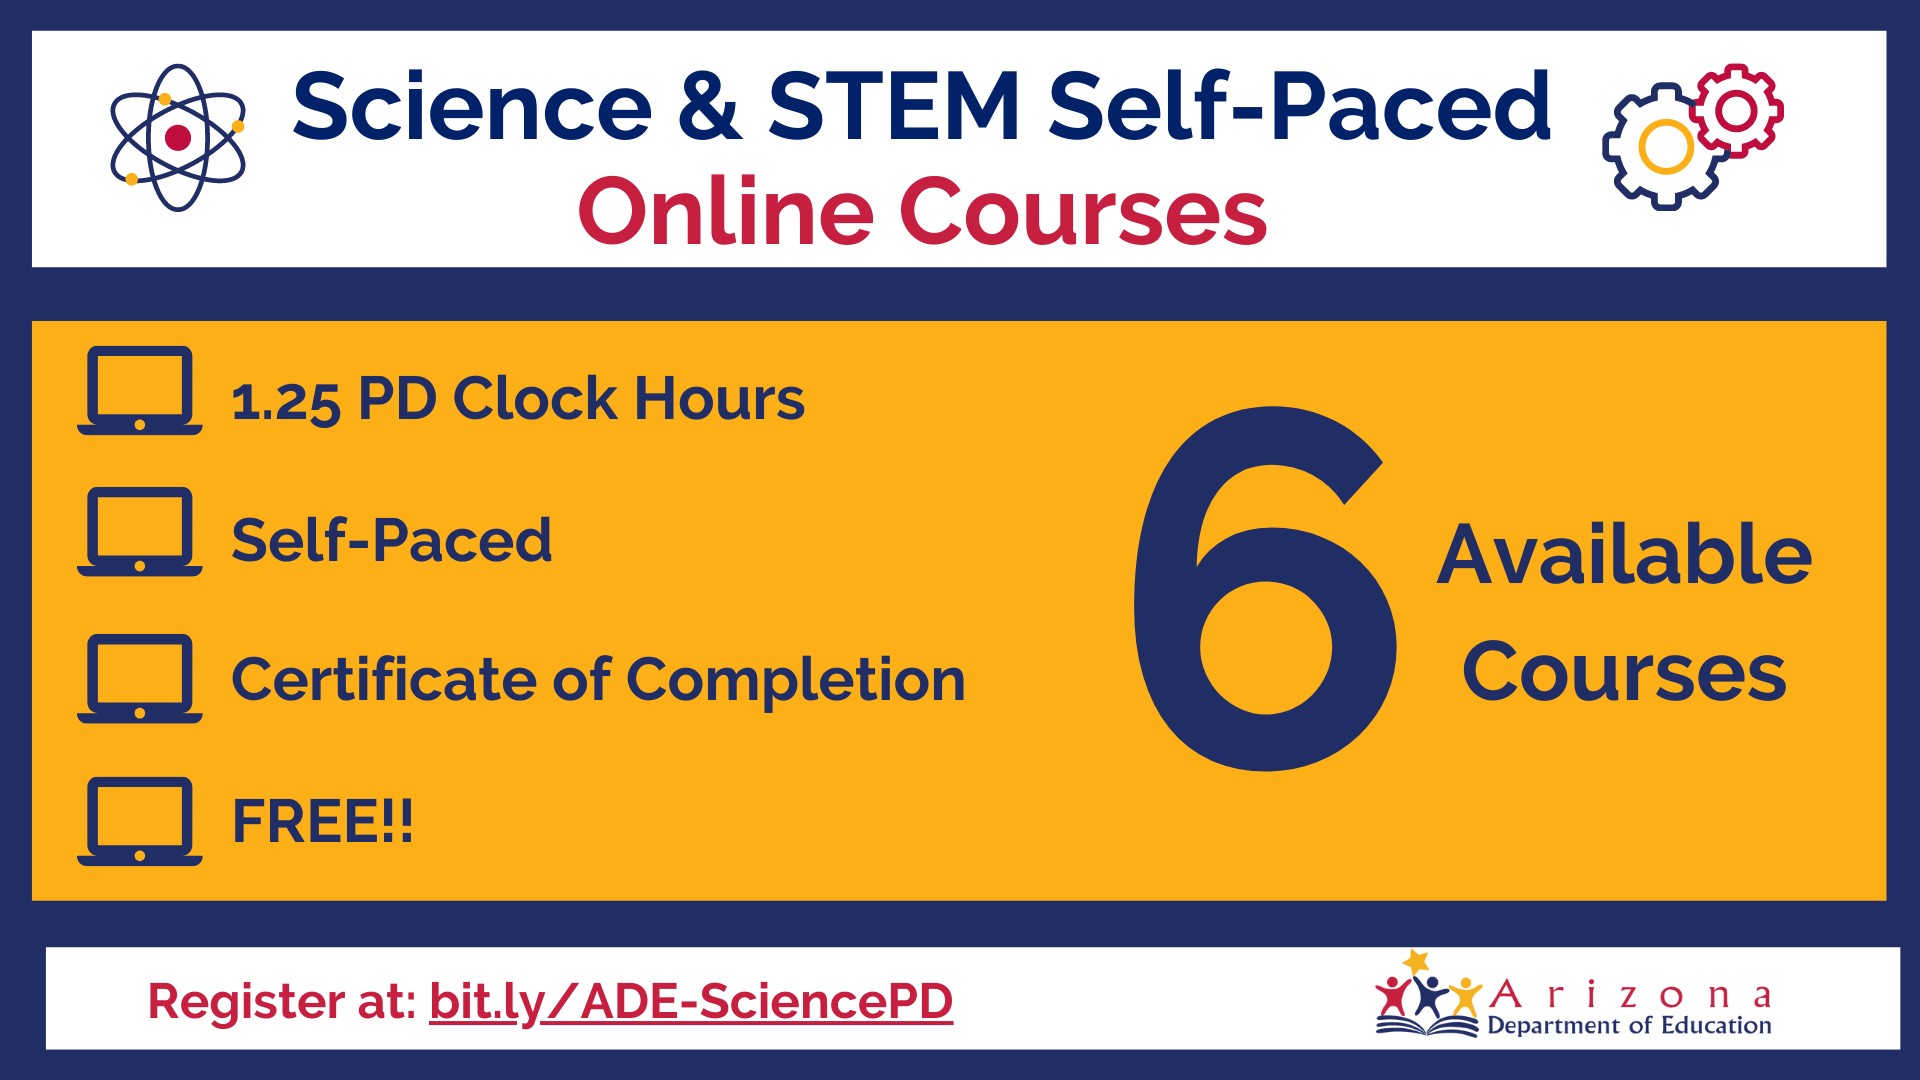 Image of Science and STEM Self-Paced Online Courses